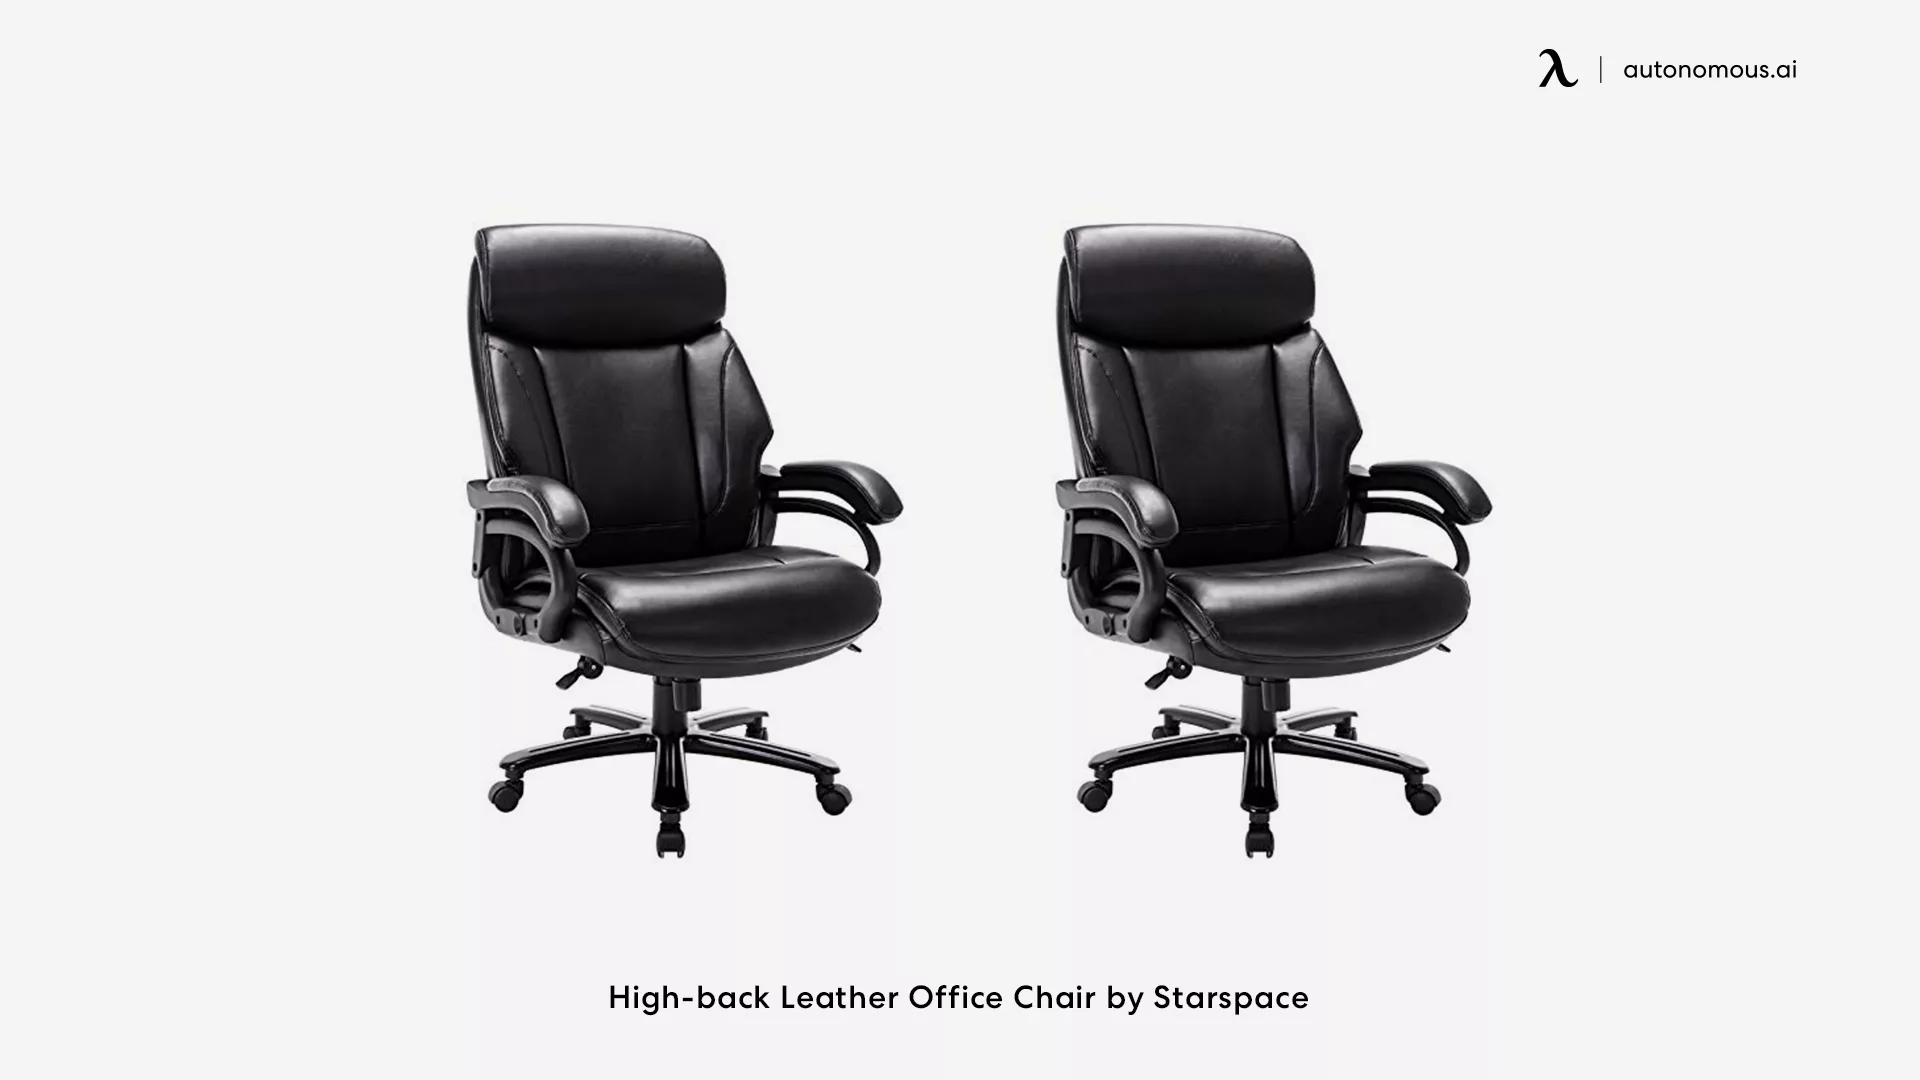 High-back Leather Office Chair by Starspace